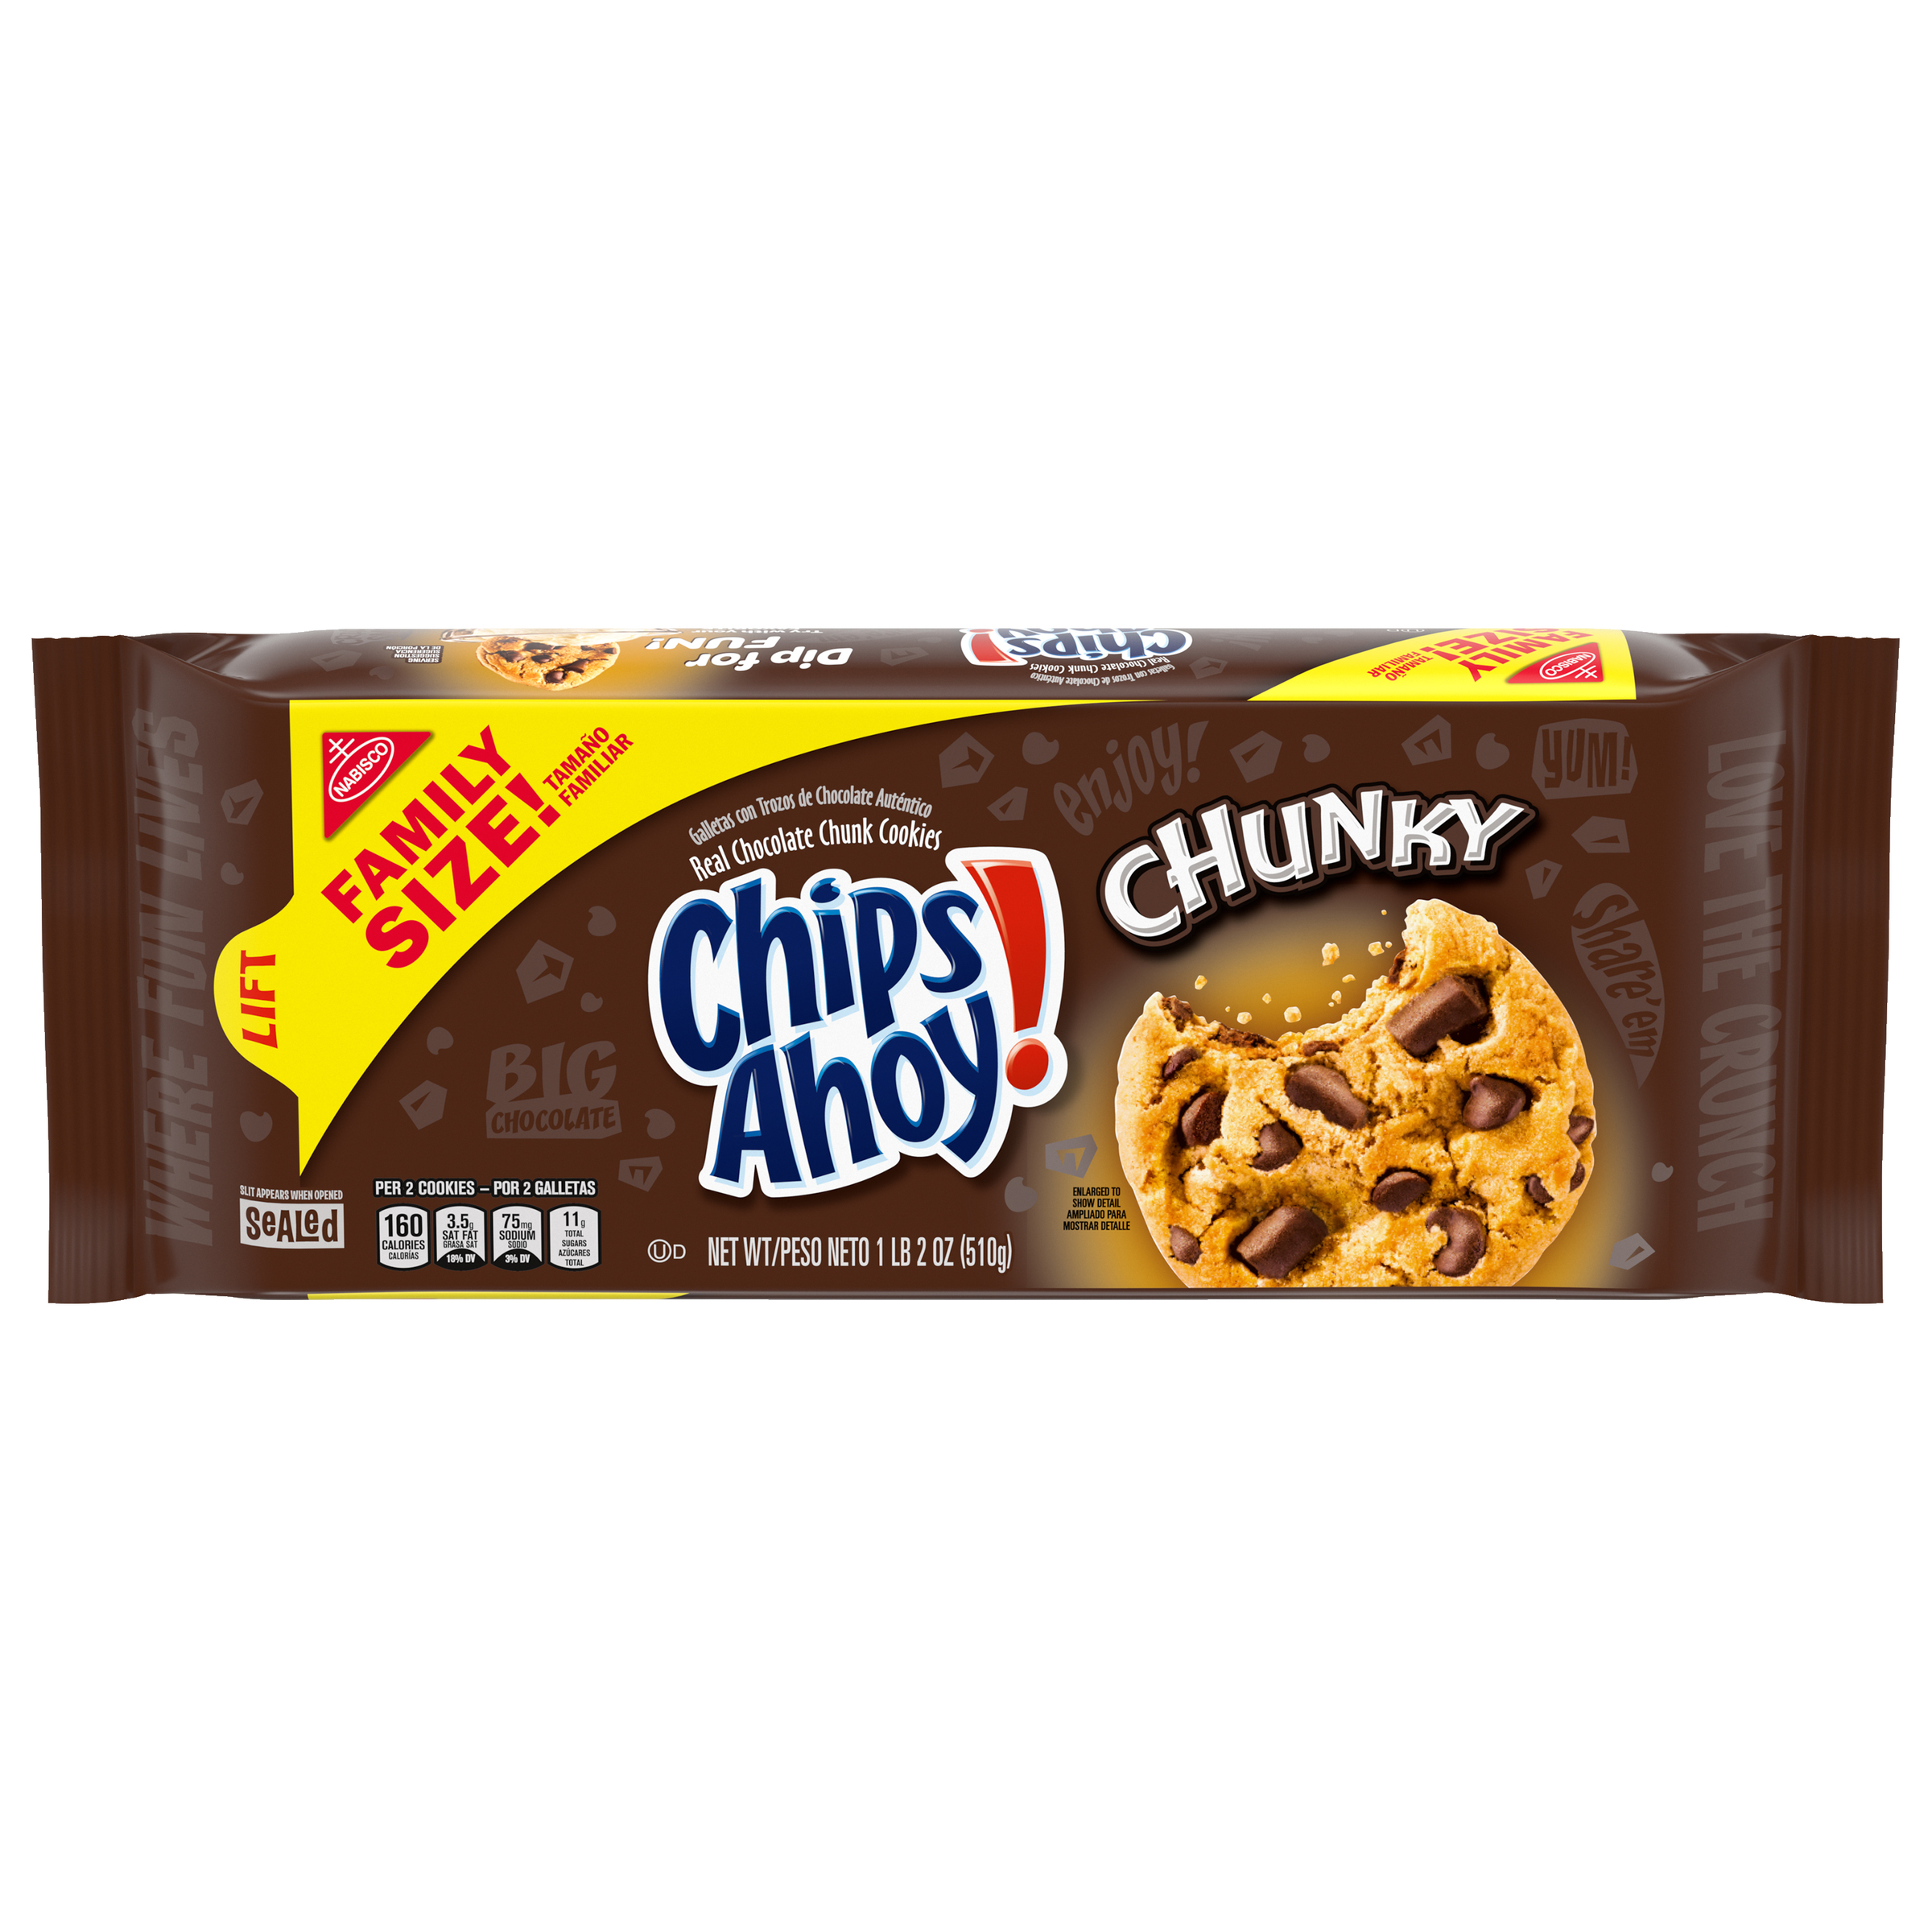 CHIPS AHOY! Chunky Chocolate Chip Cookies, Family Size, 18 oz